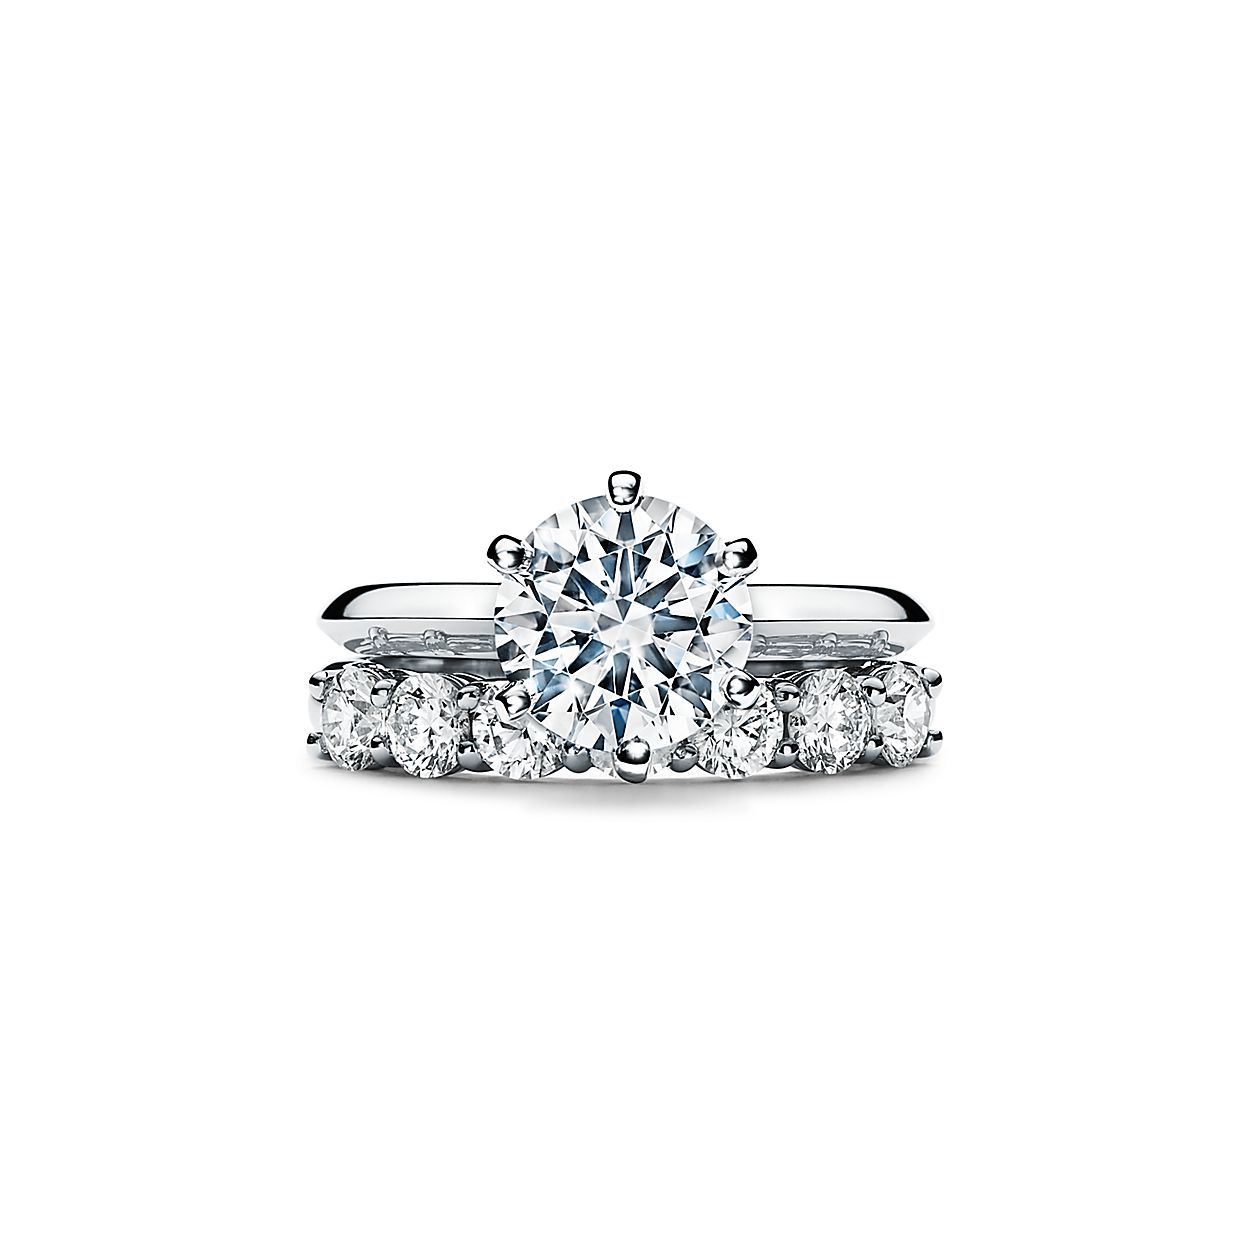 The Tiffany Setting Engagement Ring In Platinum